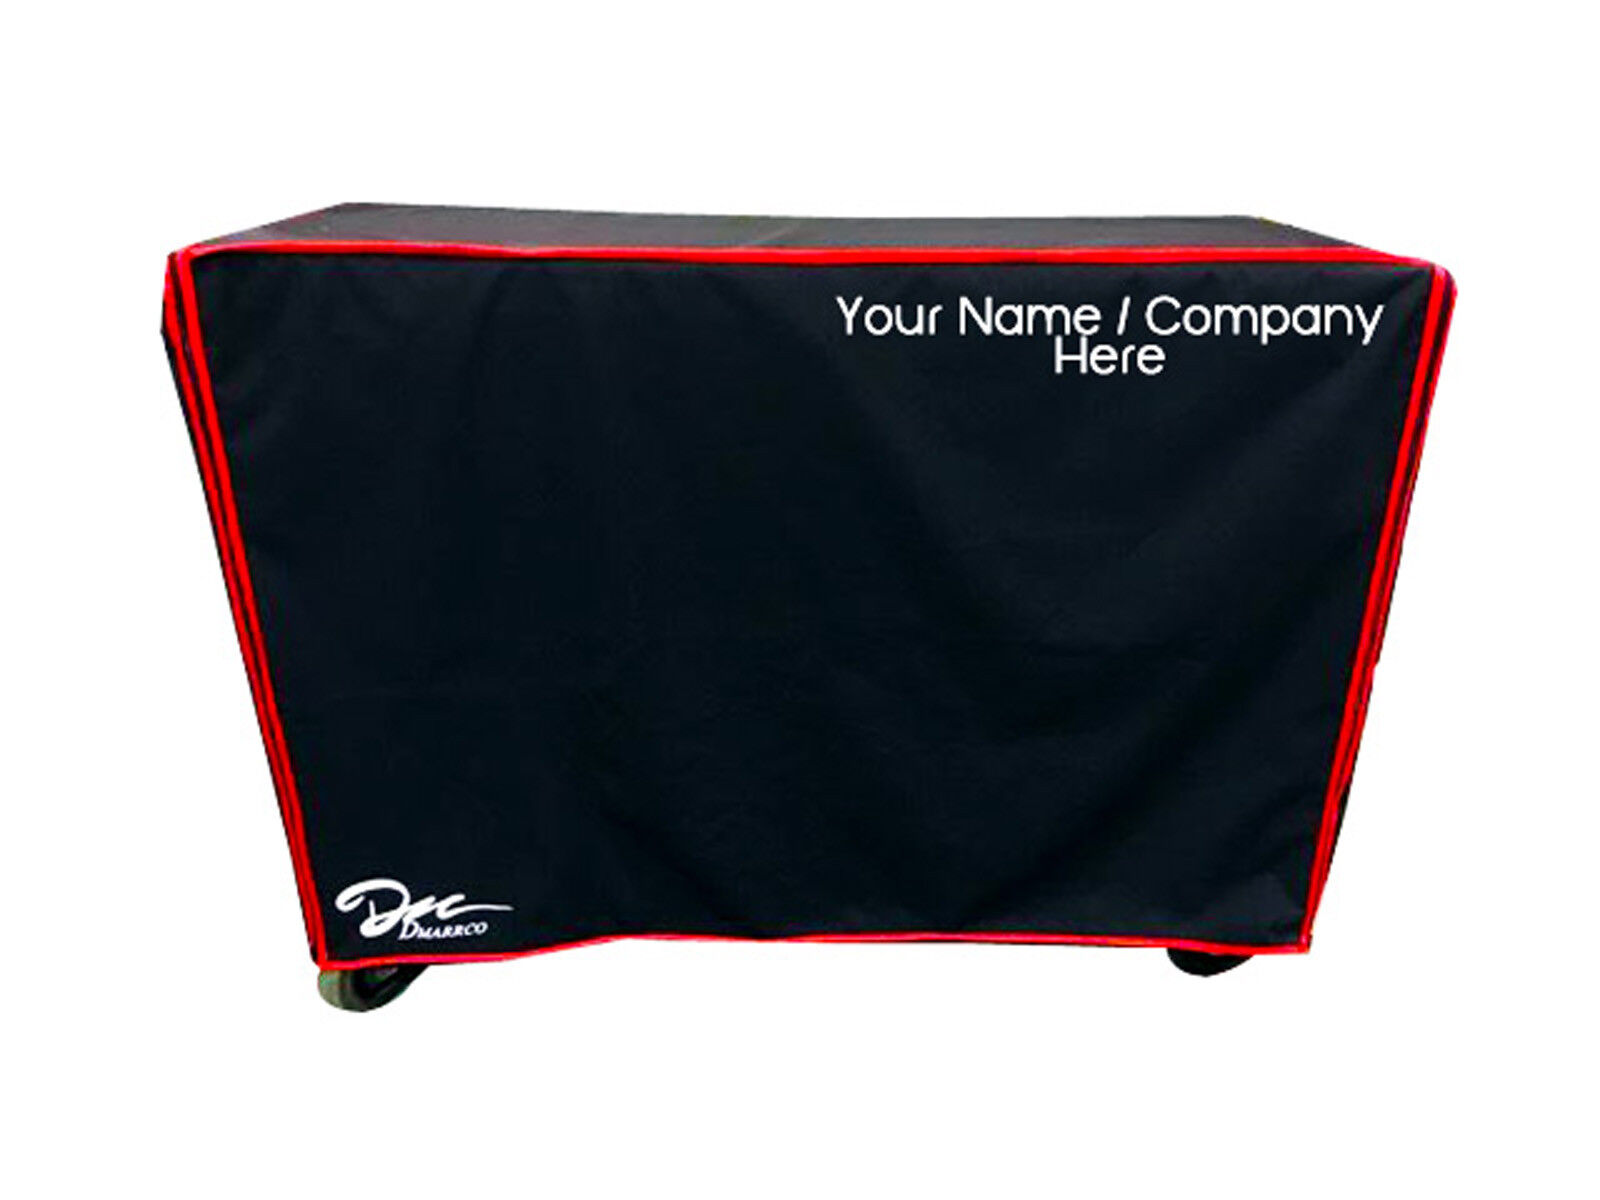 Custom Tool Box Cover by Dmarrco, fits any Snap-On 68